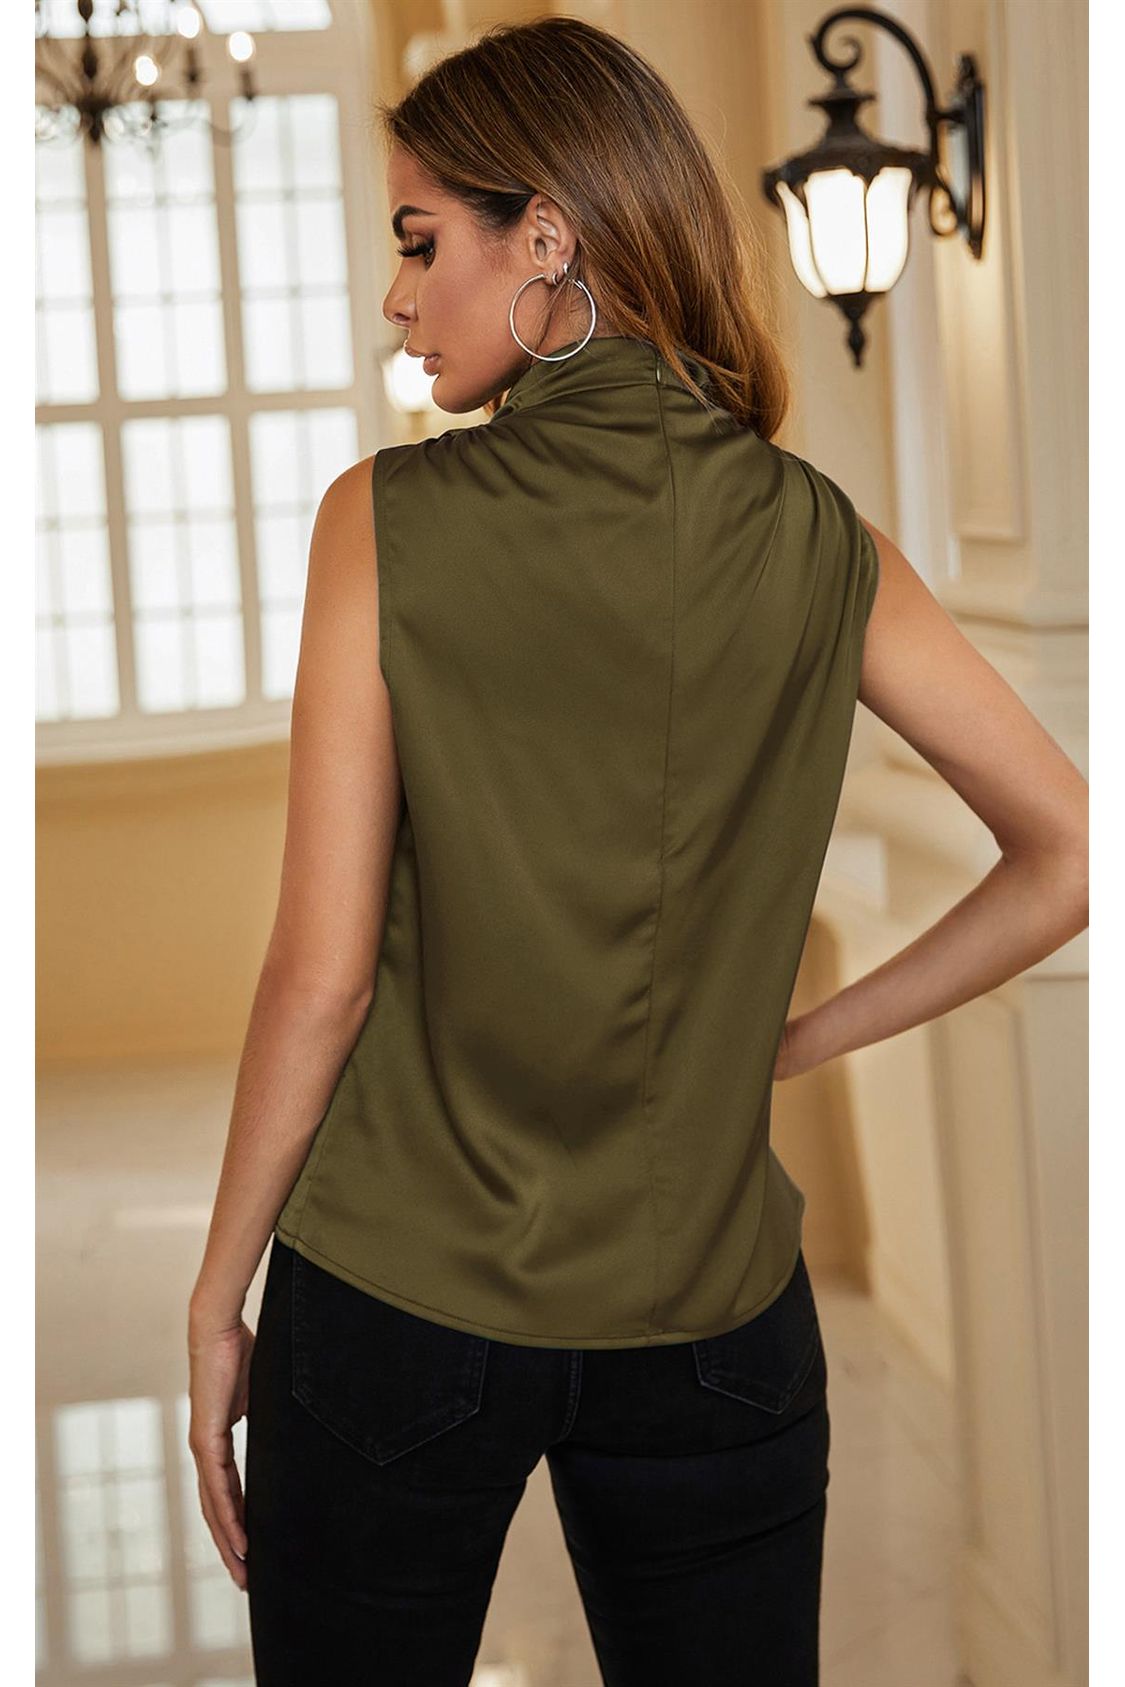 High Neck Sleeveless Blouse In Olive Green FST026-Olive